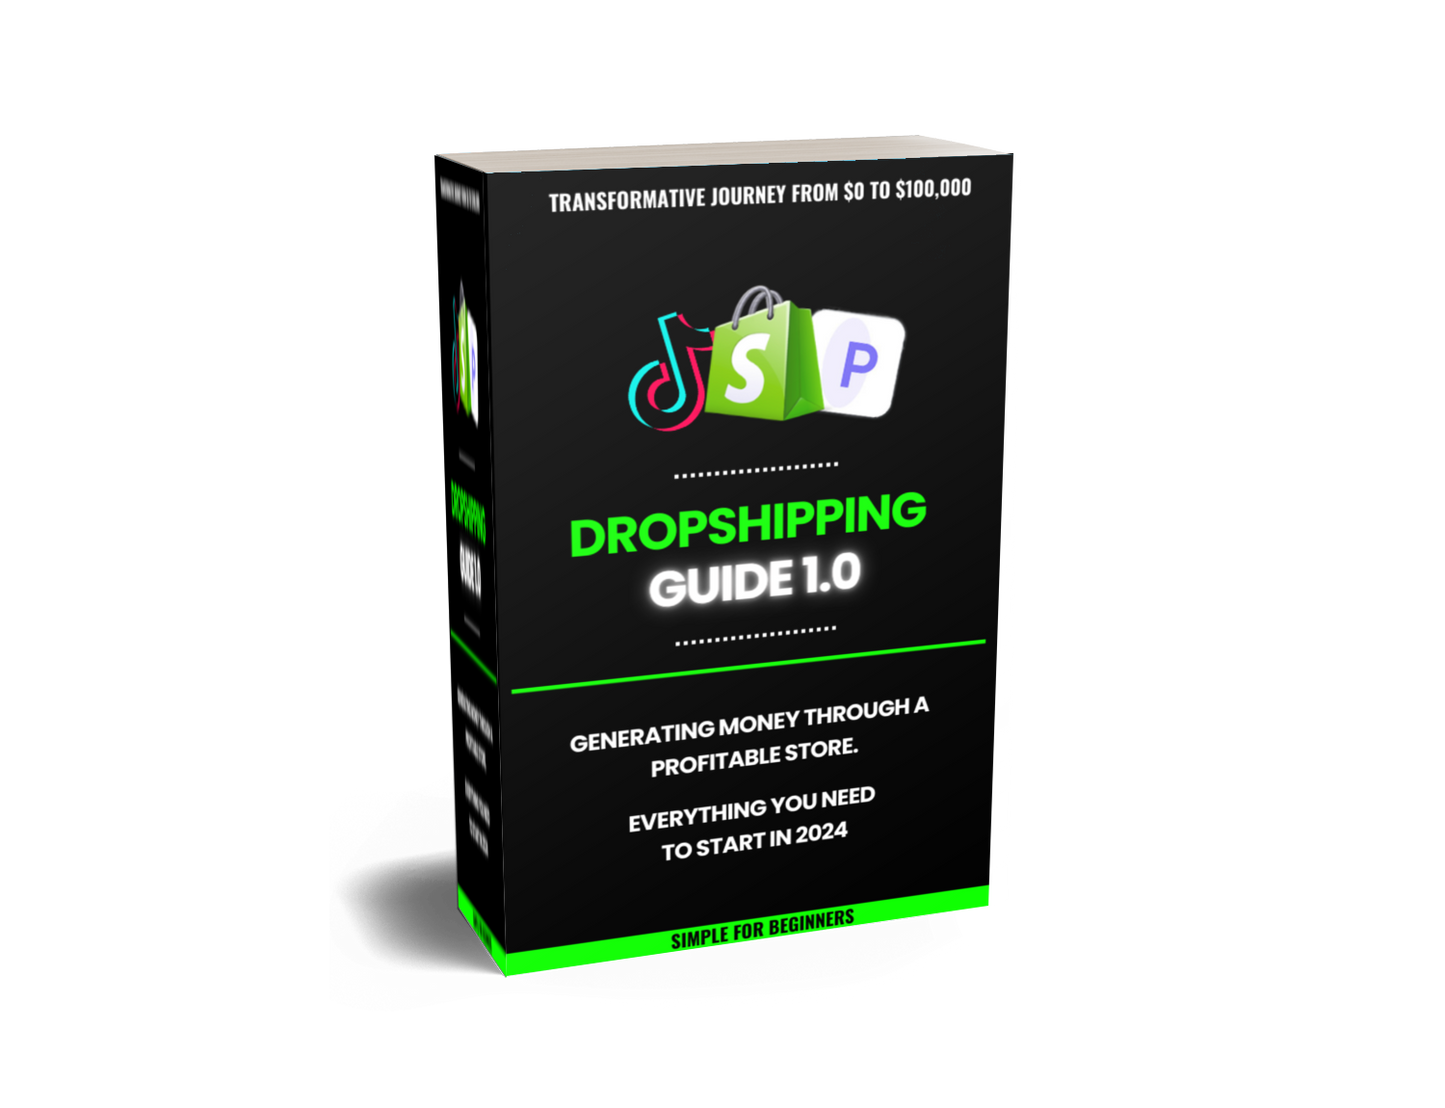 Dropshipping FULL GUIDE